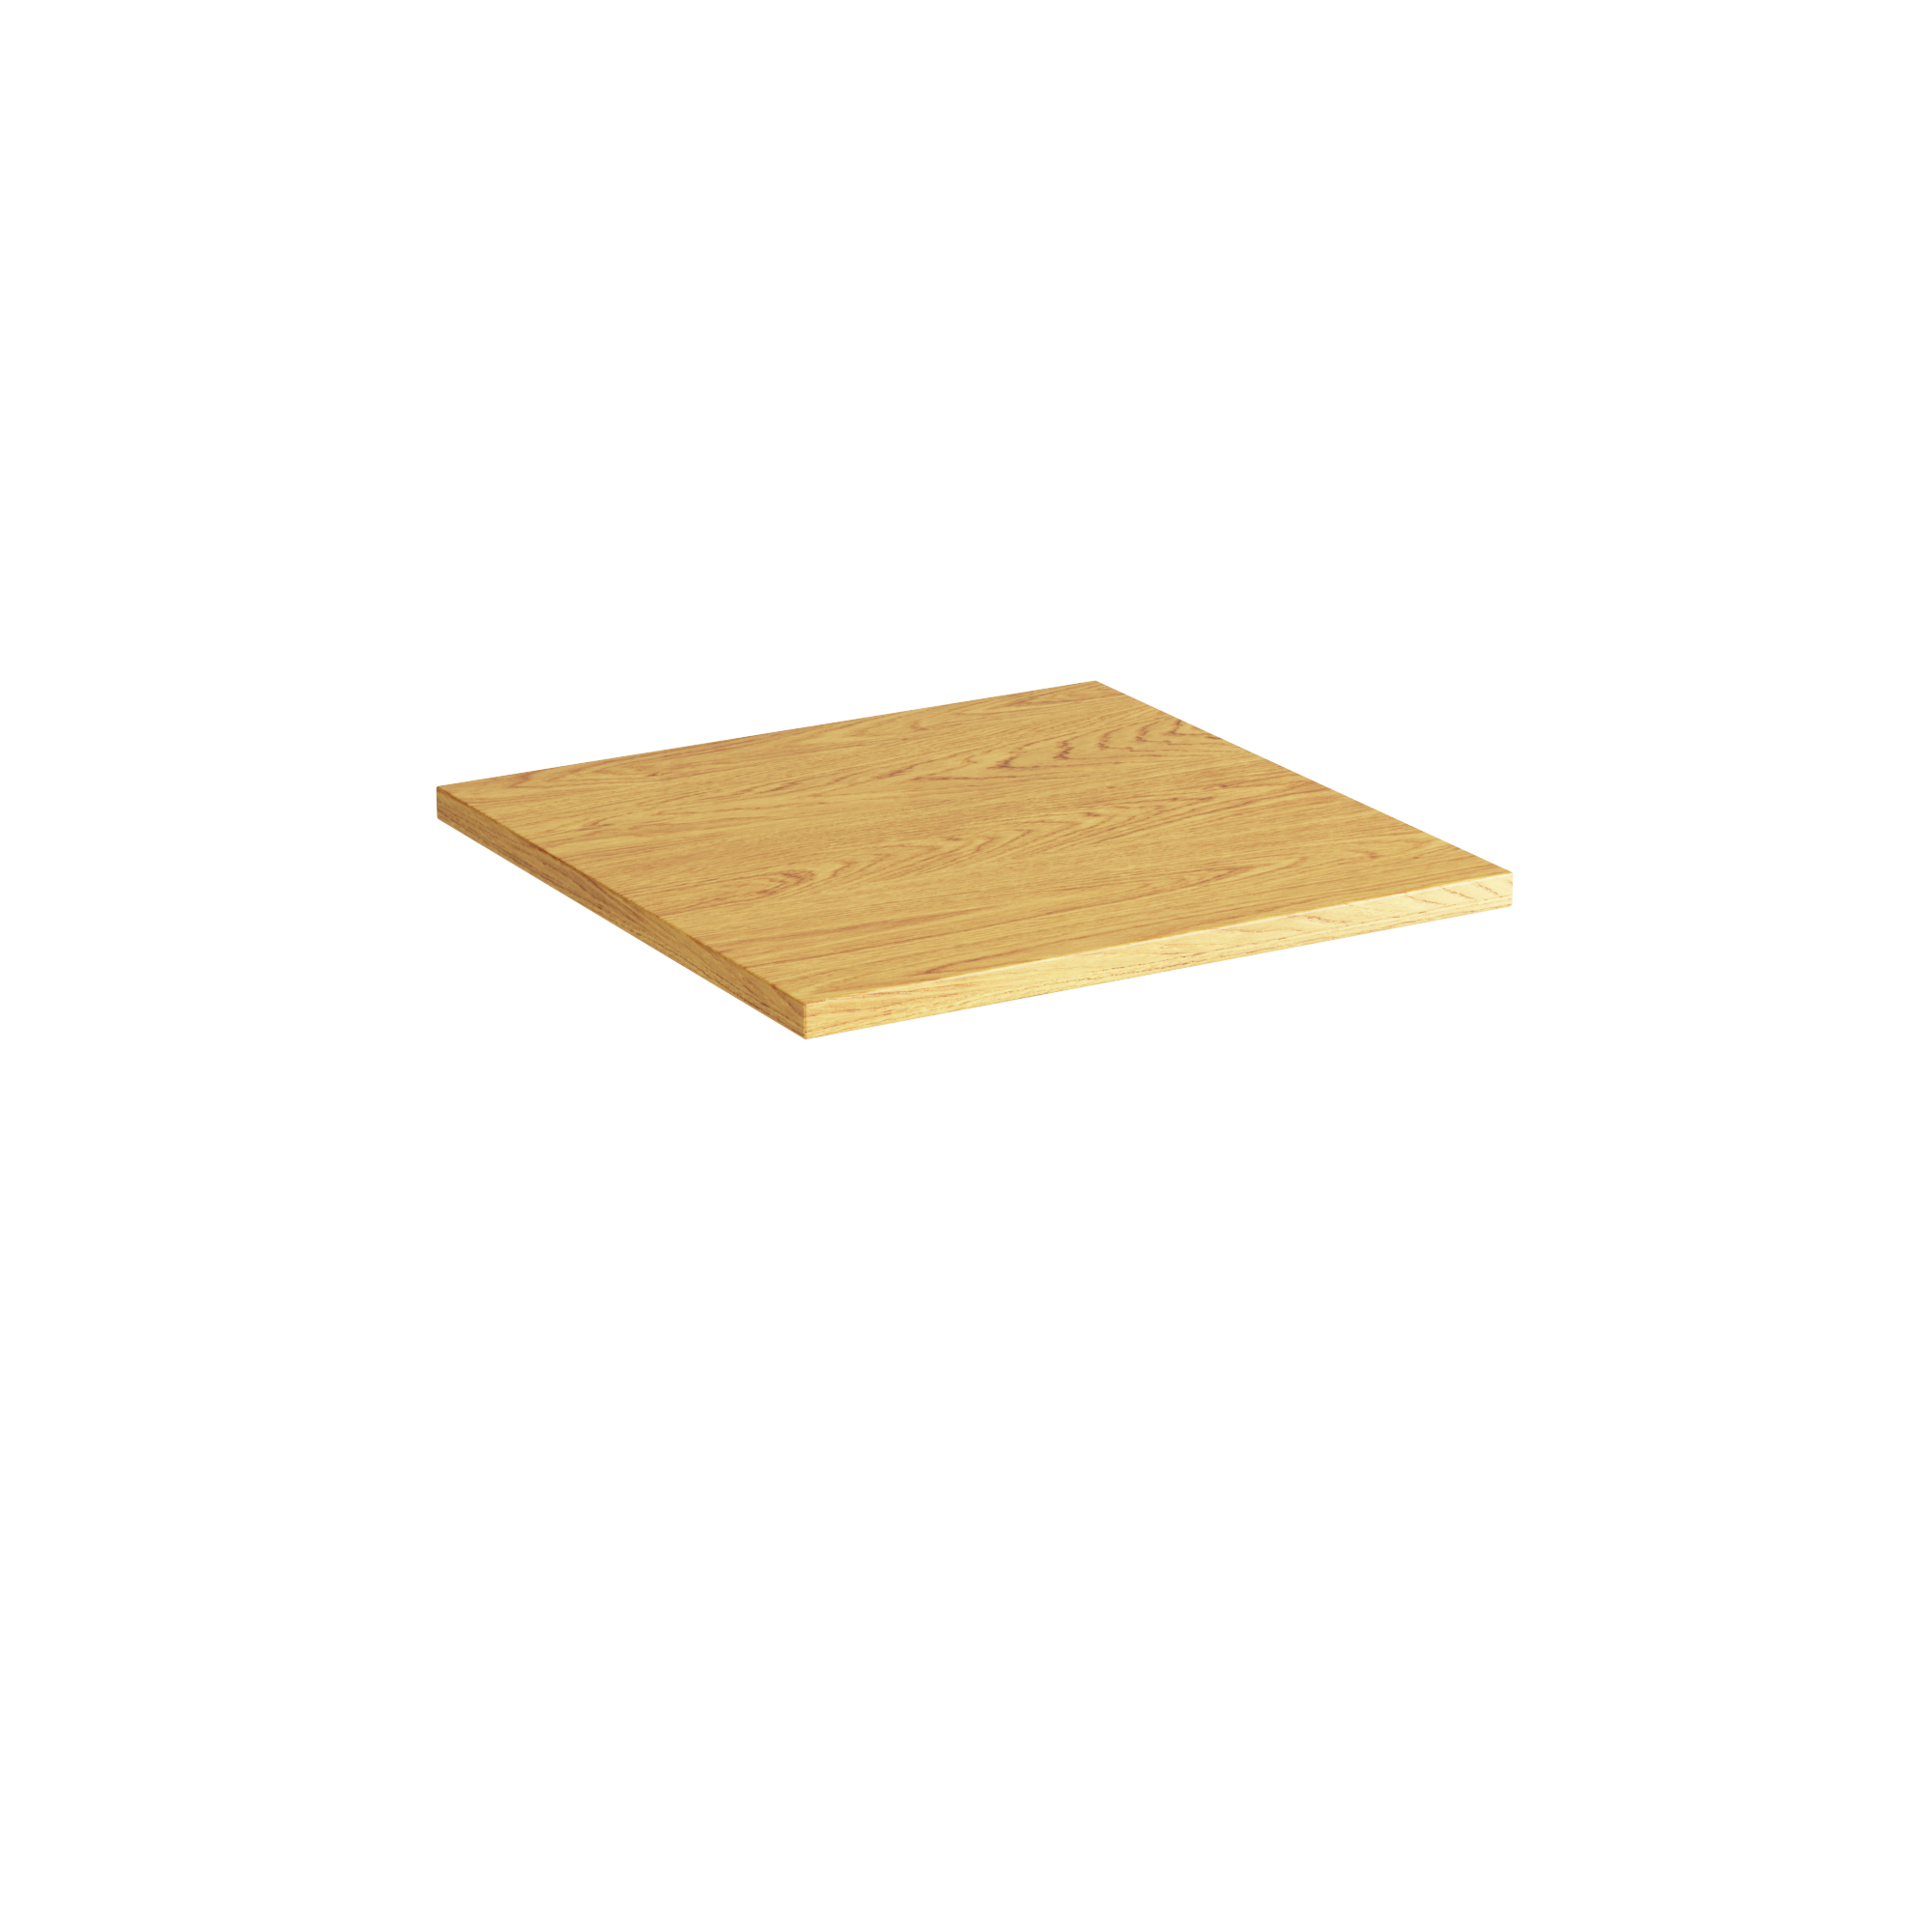 700 x 700mm Square Table Top